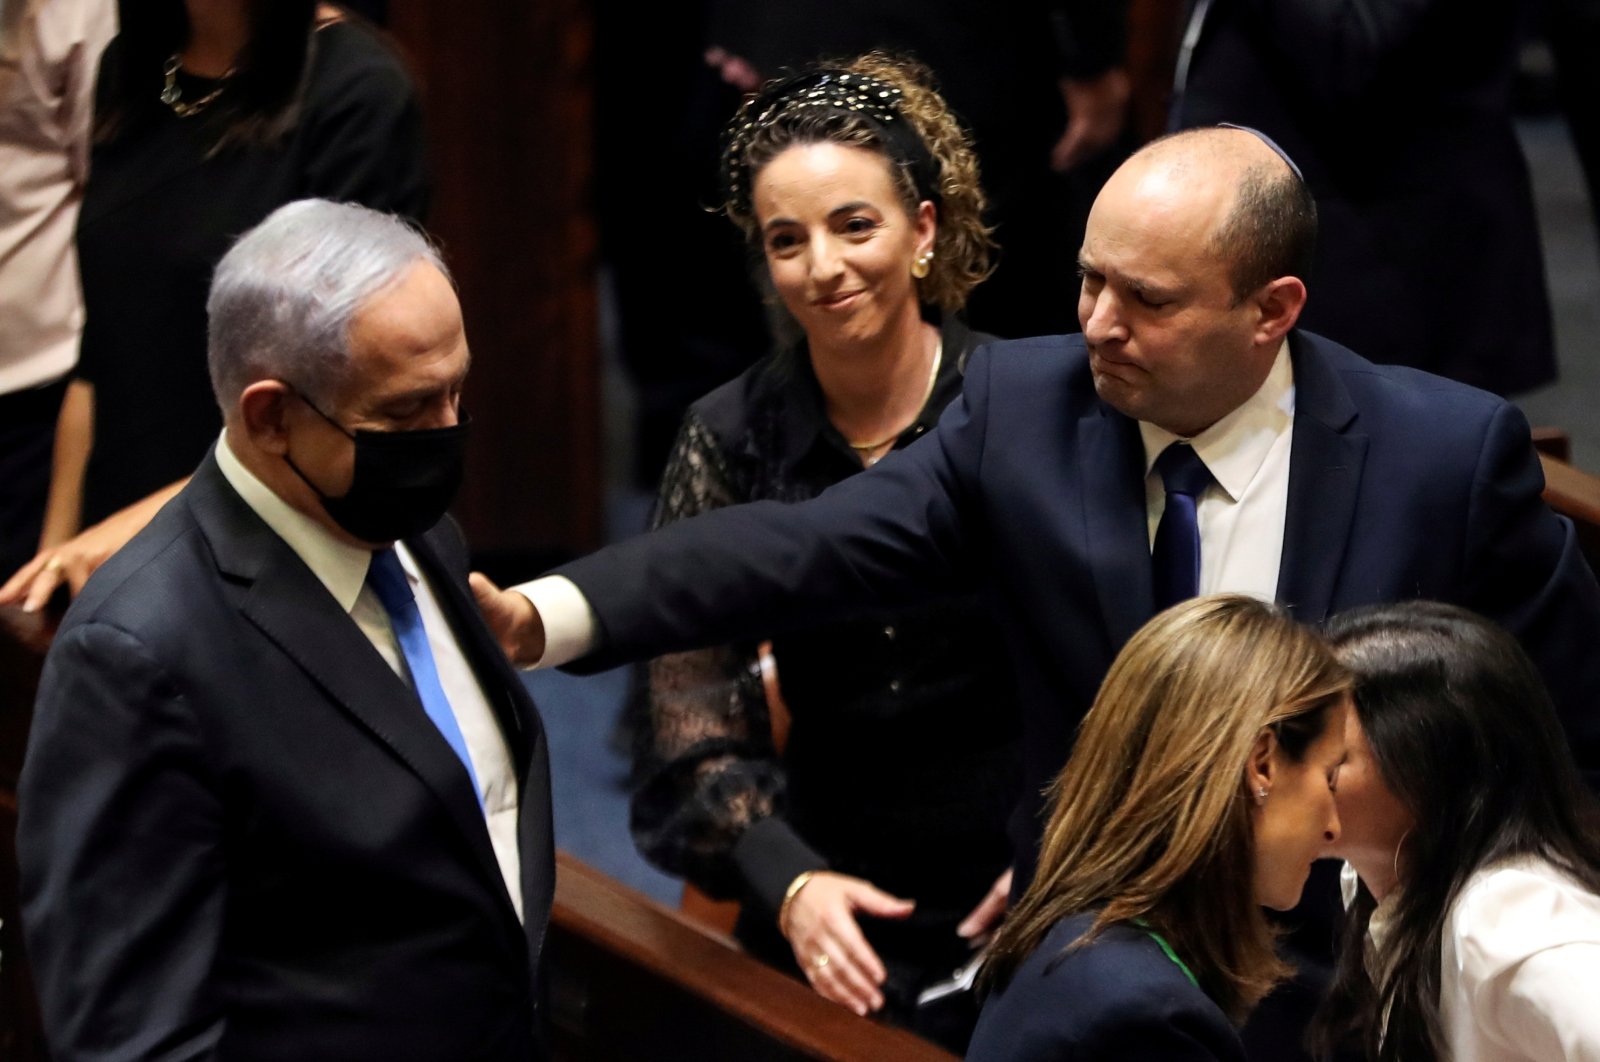 Former Prime Minister Benjamin Netanyahu (L) and Israel Prime Minister Naftali Bennett (R) gesture following the vote on the new coalition at the Knesset, Israel's parliament, in Western Jerusalem, Israel, June 13, 2021. (Reuters Photo)